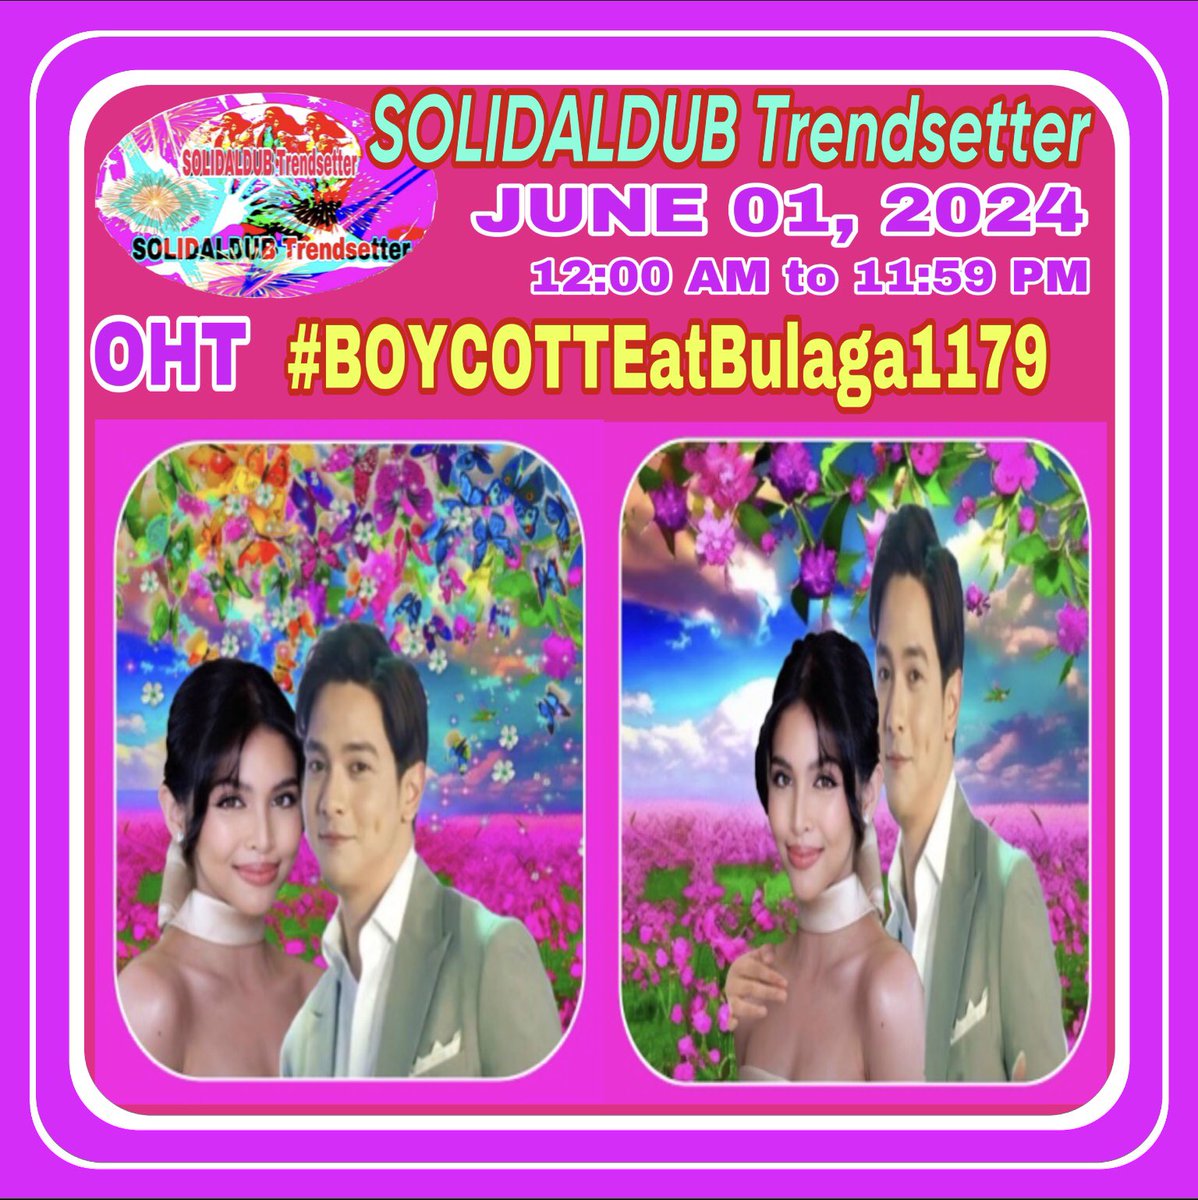 TBADN has faced a lot of obstacles but we never gave up
Let's continue d fight 4 TRUTH& HONOR  4 ALDUB
@aldenrichards02
@mainedcm
& the TRUE BLOODED ALDUBNATION. RESPECT BEGETS RESPECT
Our OHT 4 JUNE 01,  2024
ALDUB PA RIN
#BOYCOTTEatBulaga1179
NO TO SOLO PROJECTS